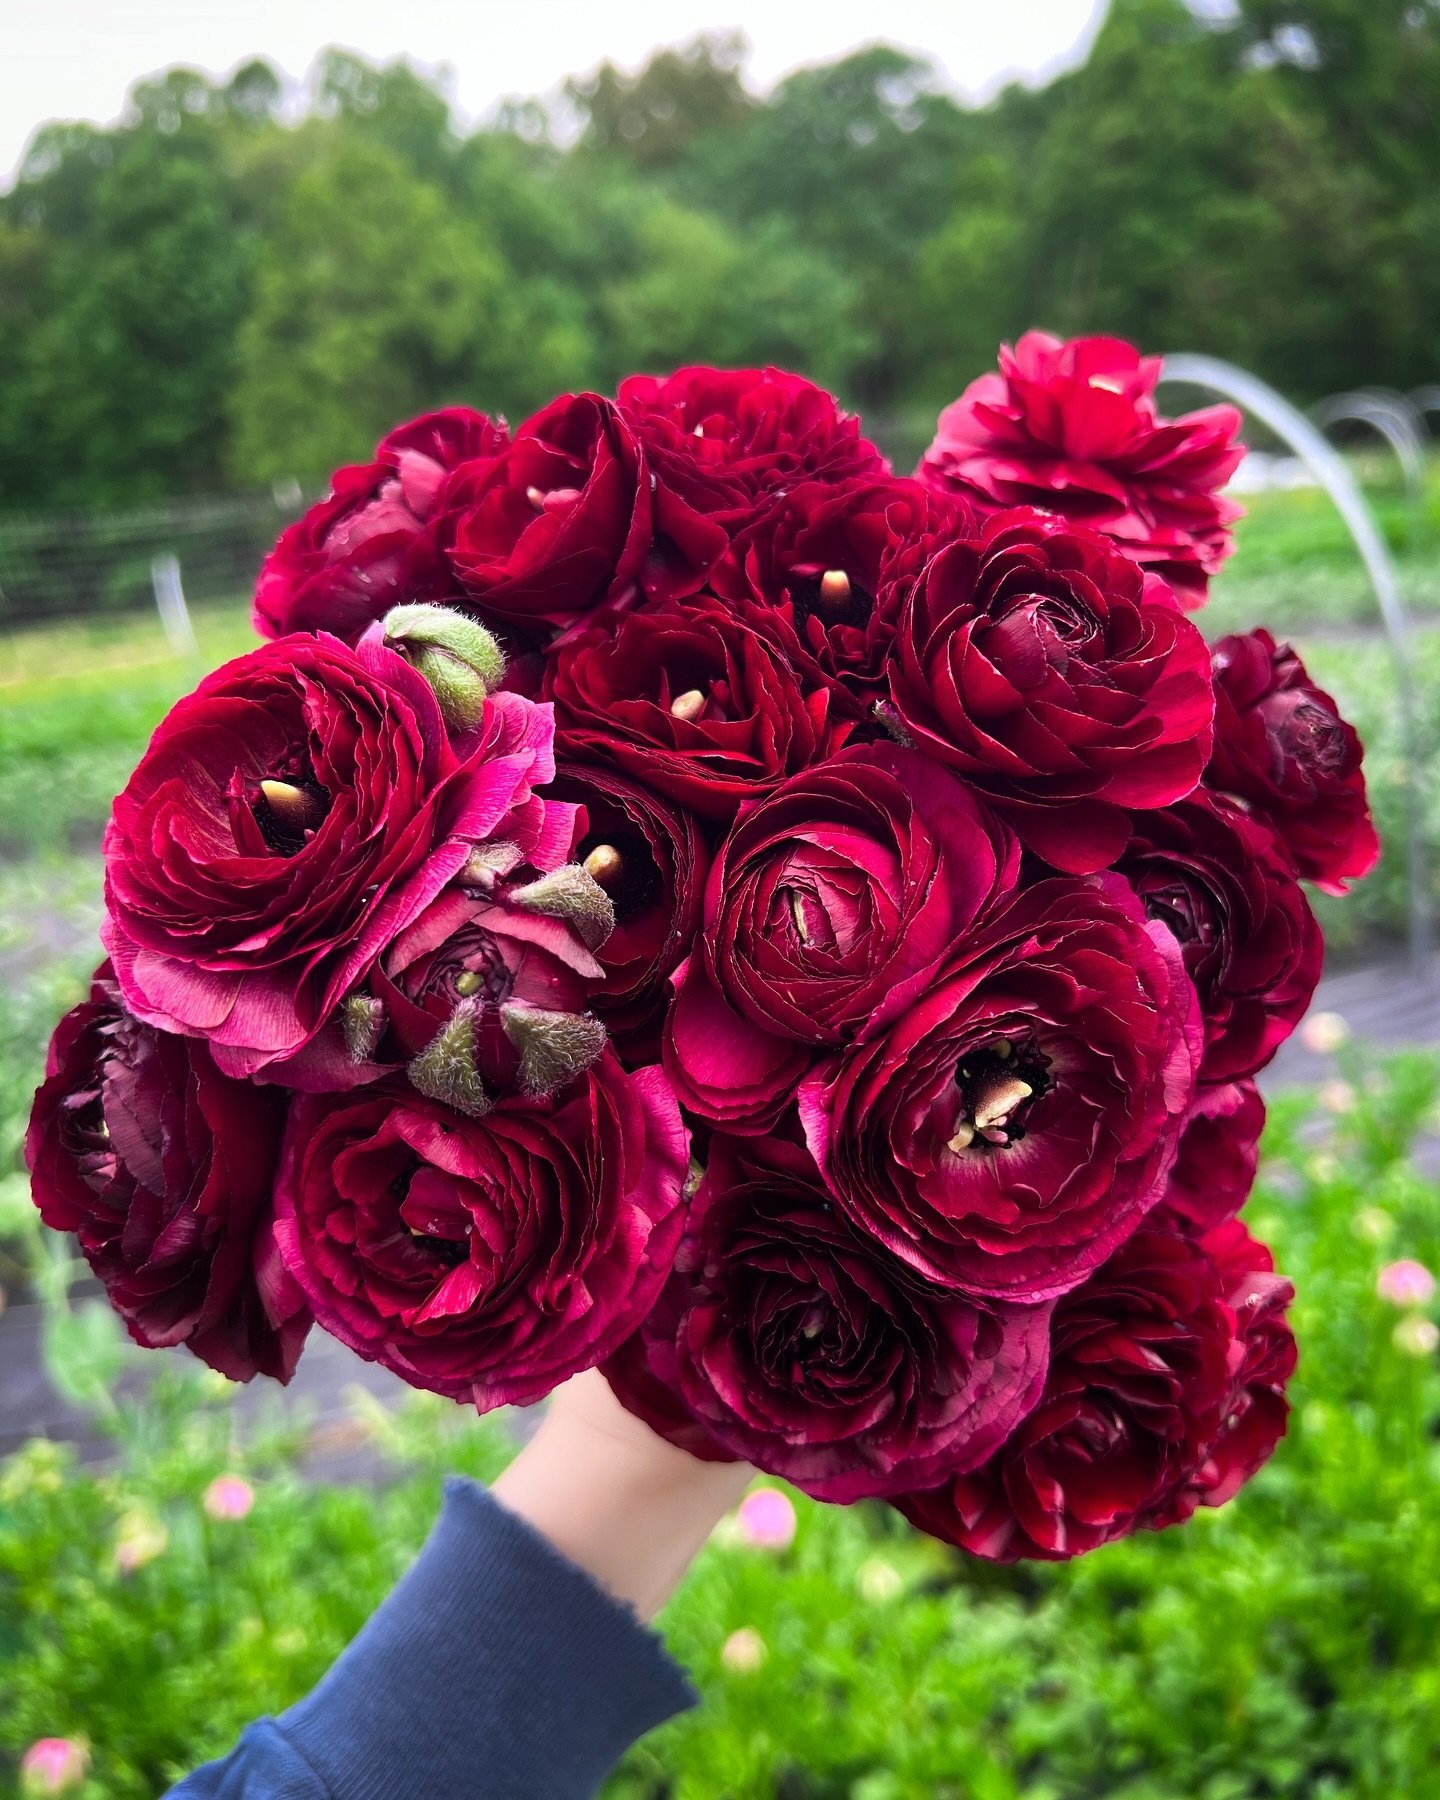 This is the first year we&rsquo;ve grown these burgundy ranunculus: what do you think?? The ranunculus have really benefitted from the cooling off we&rsquo;ve had these past few days, though I could stand a little less rain myself&hellip;
.
.
.
#ranu